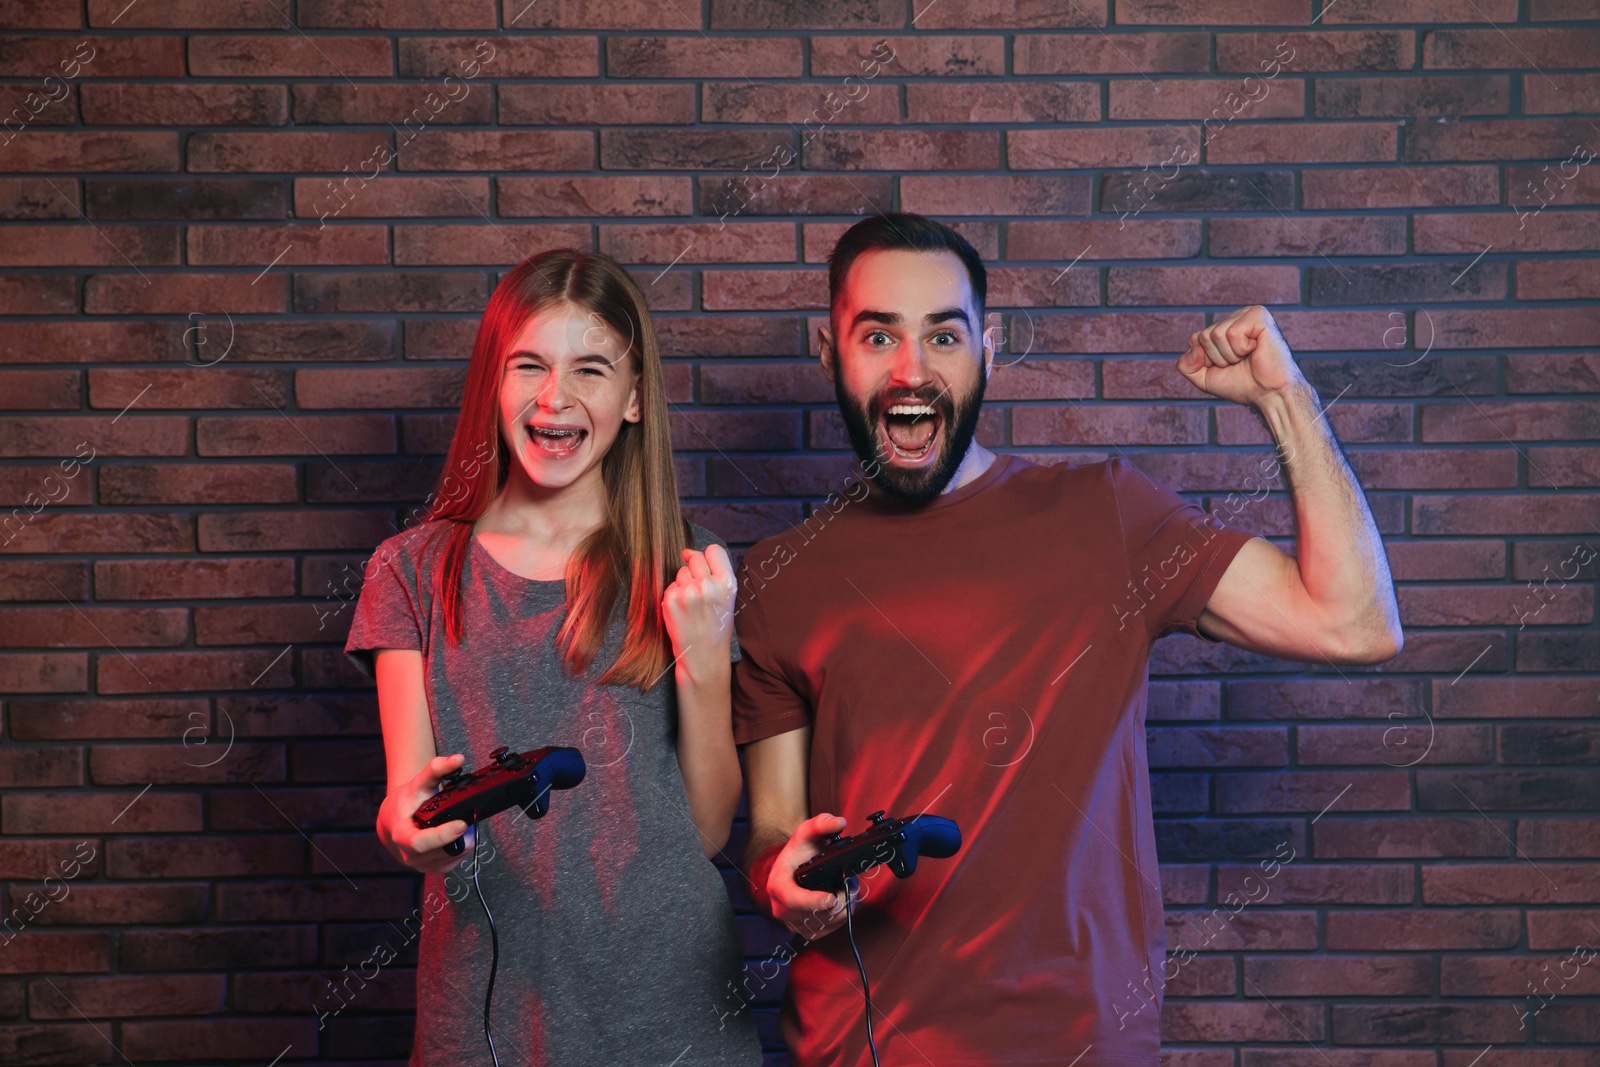 Photo of Young man and teenage girl playing video games with controllers near brick wall